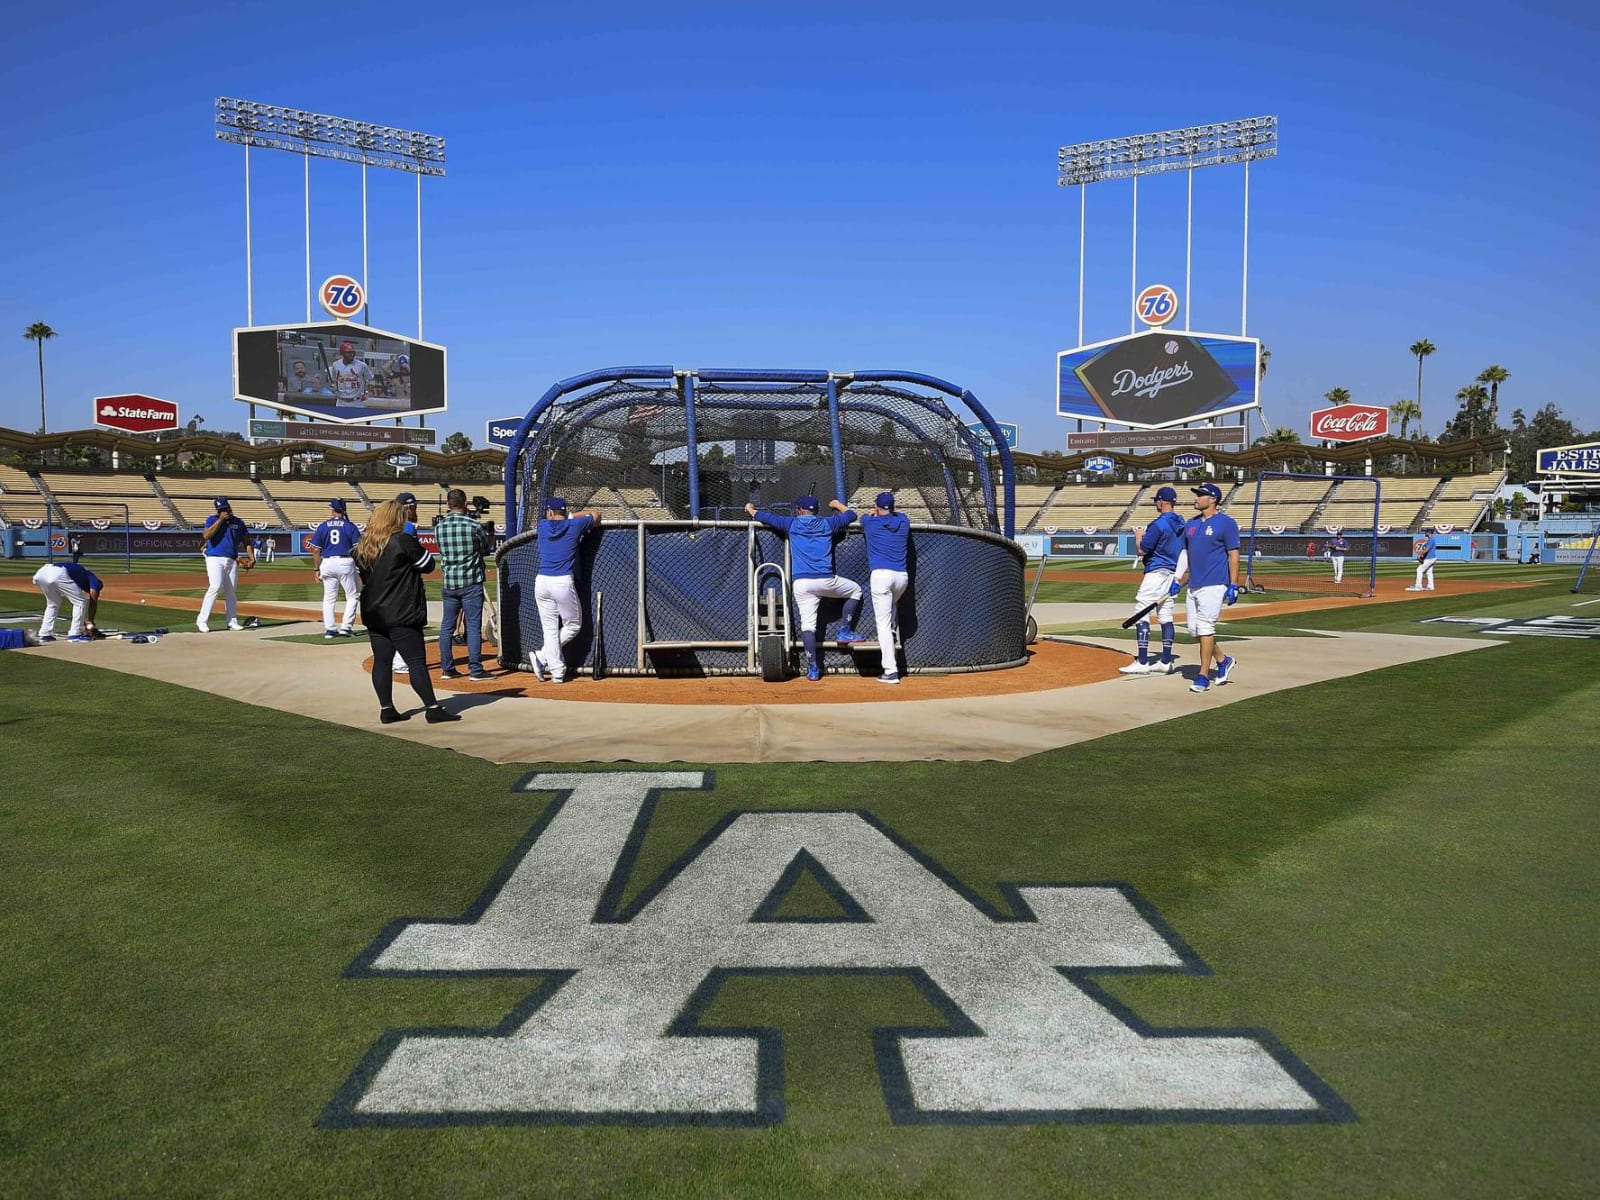 2020 All-Star Game cancelled, Dodgers to host in 2022